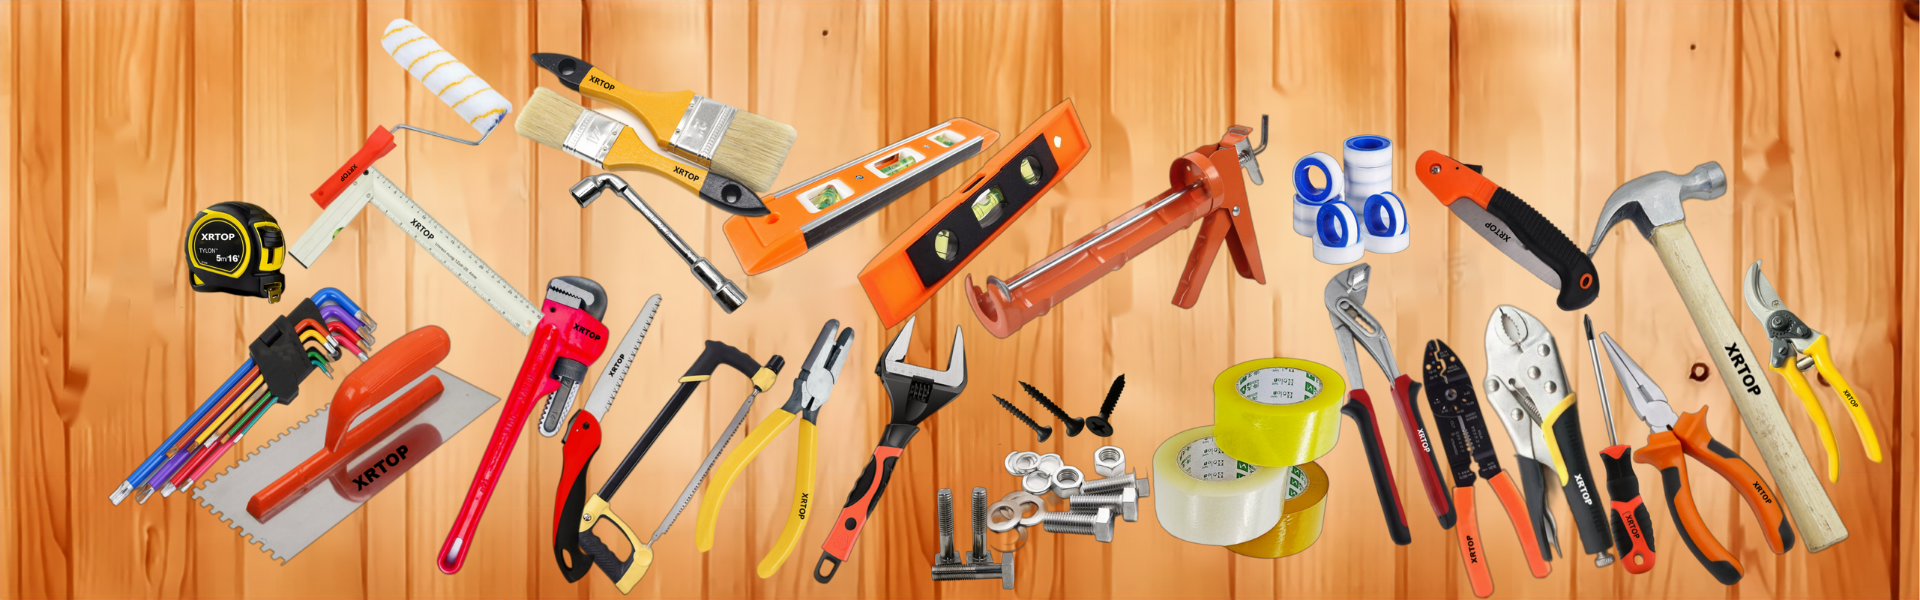 Huzhou xrtop specializes in various hand tools and accessories, such as pliers, wrenches, screwdrivers, aviation scissors, garden saws, agricultural machetes, hammers, door locks, hinges, fasteners, Teflon tape, transparent tape, etc